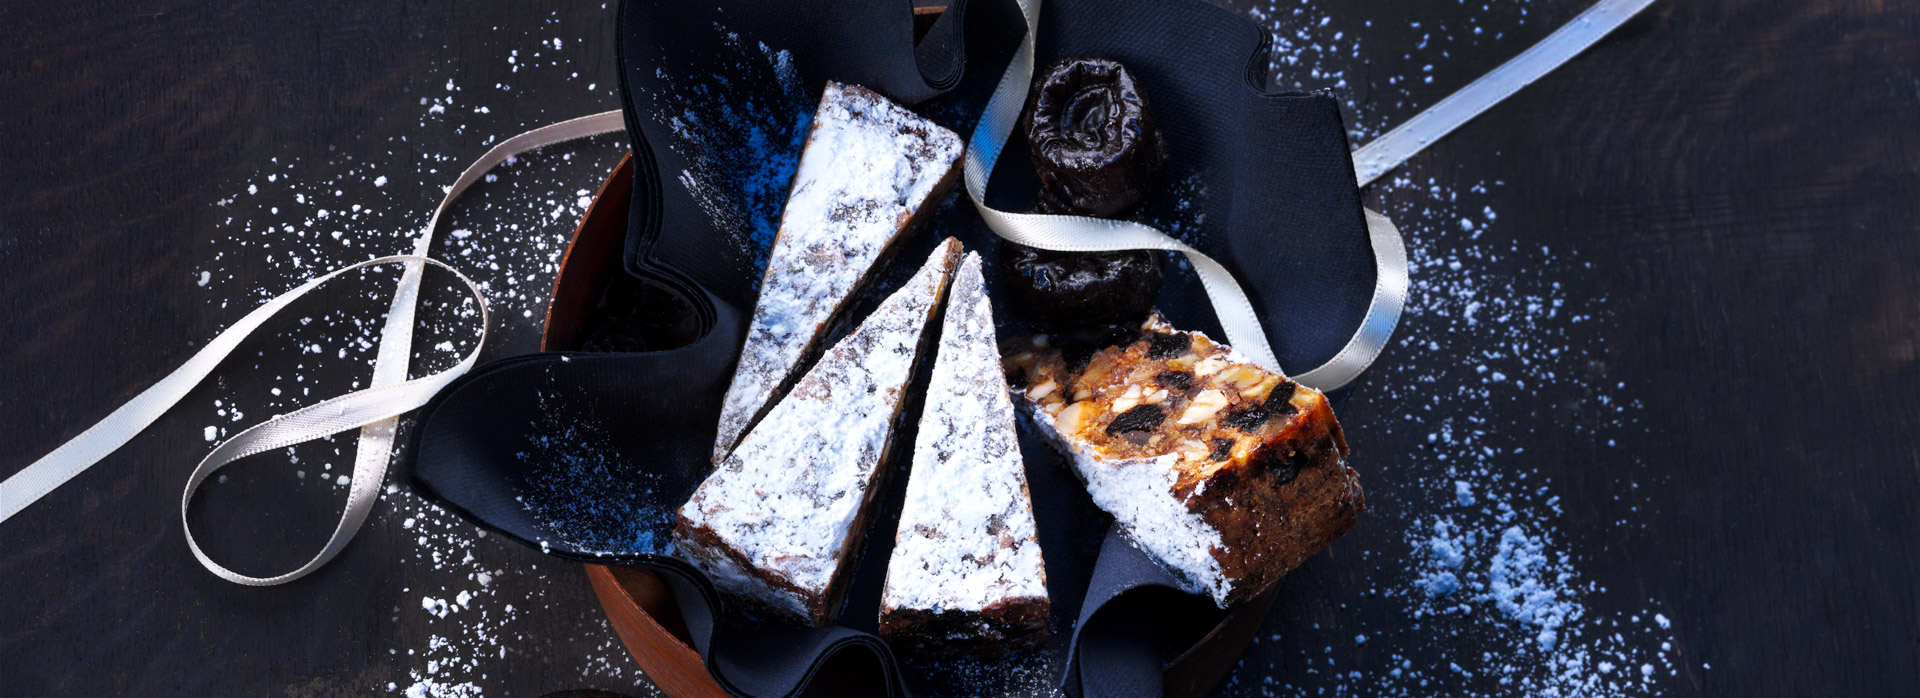 This sumptuous Italian winter recipe is packed with fruits and nuts and is sure to add to your baking repertoire. Panforte can be served at the end of a meal with tea or coffee or packaged for the holiday gift-giving season.